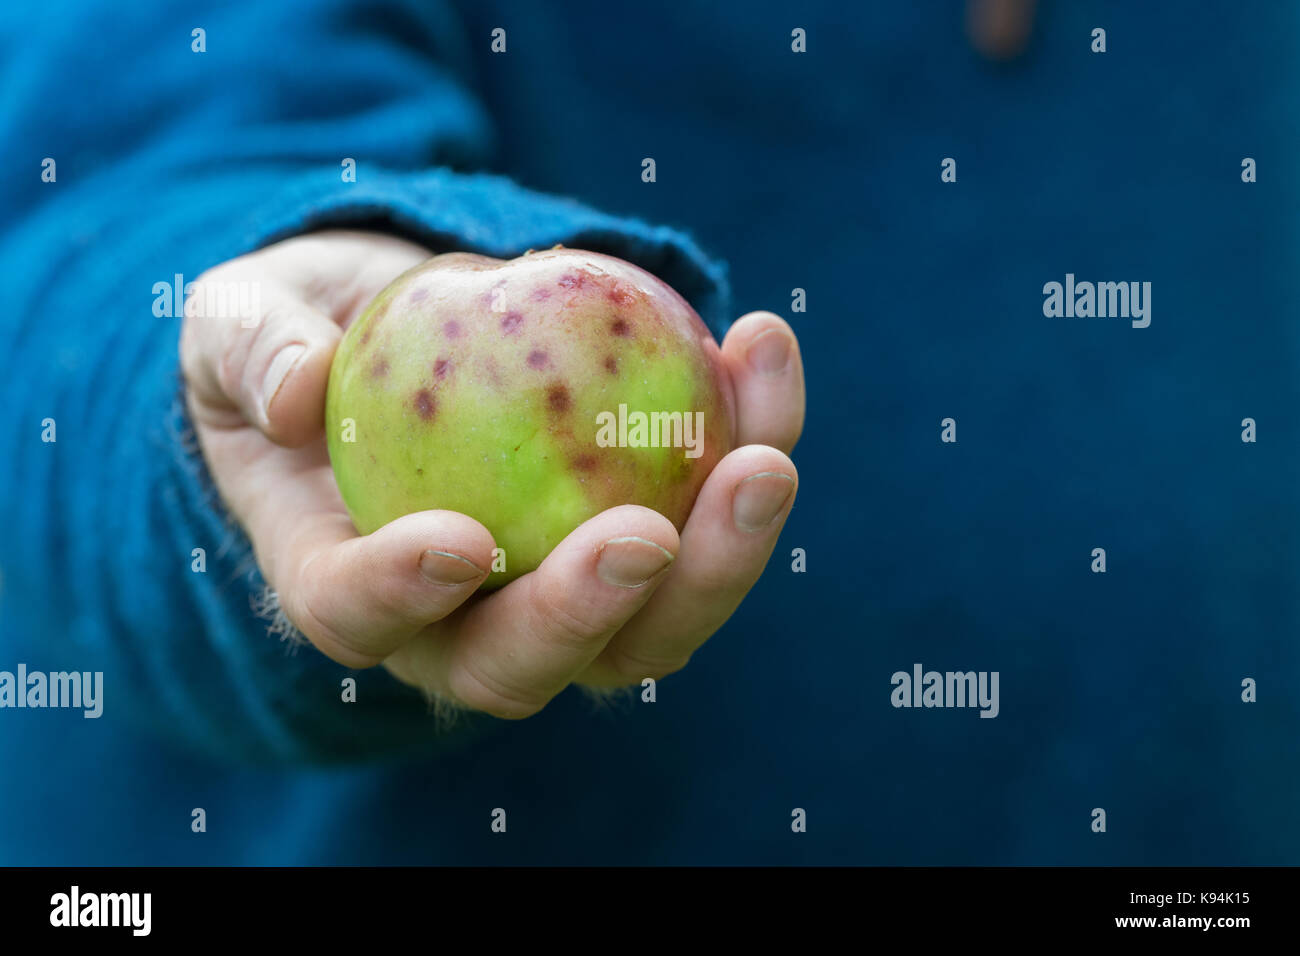 Malus domestica 'Anne elizabeth'. Gardener holding Apples with bitter pit disorder Stock Photo